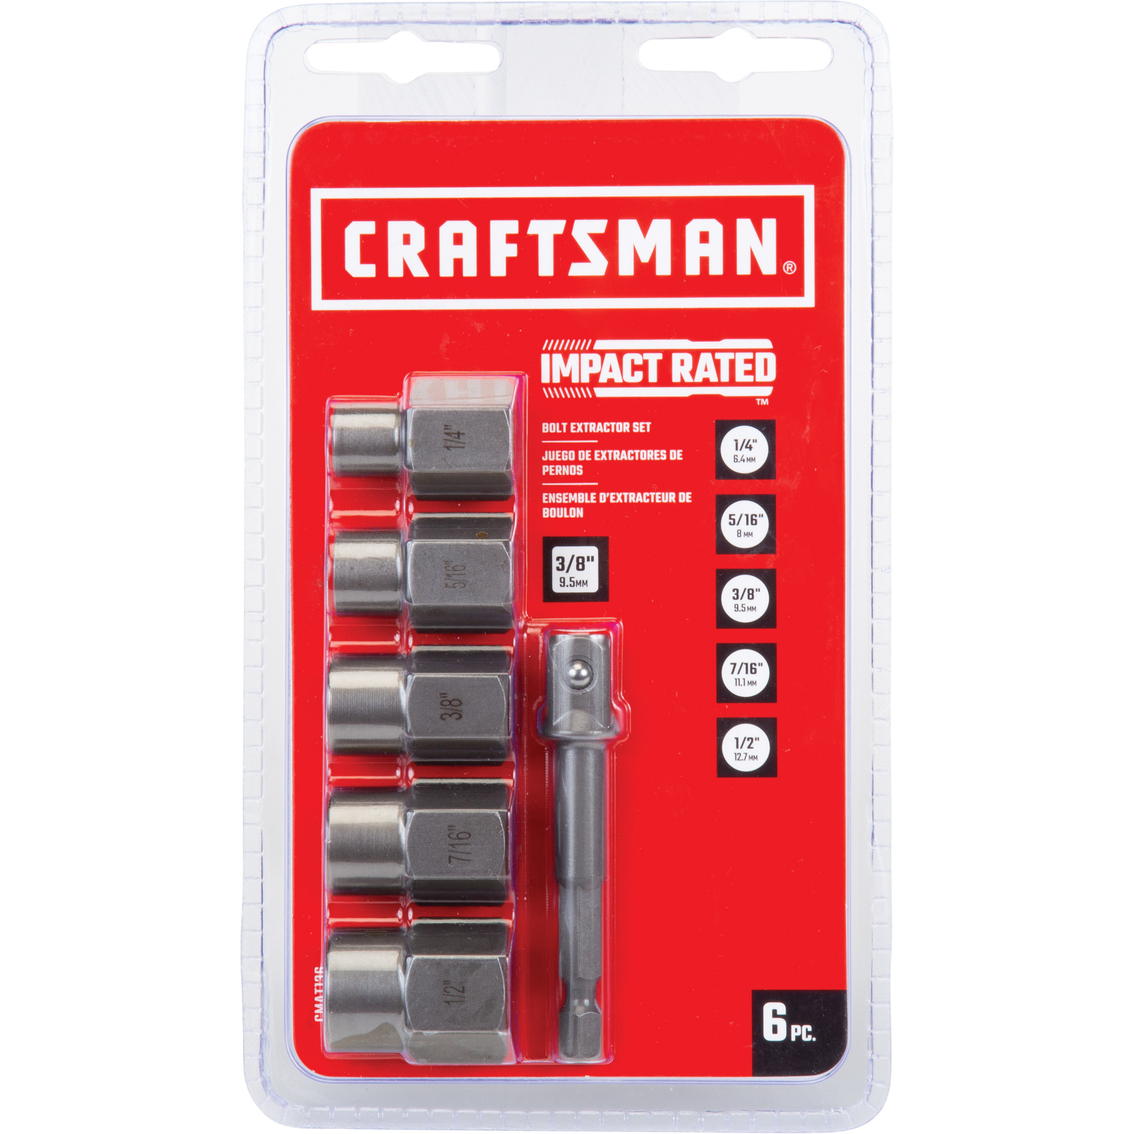 CRAFTSMAN 6 pc. IMPACT READY Bolt Extractor Set - Image 2 of 2